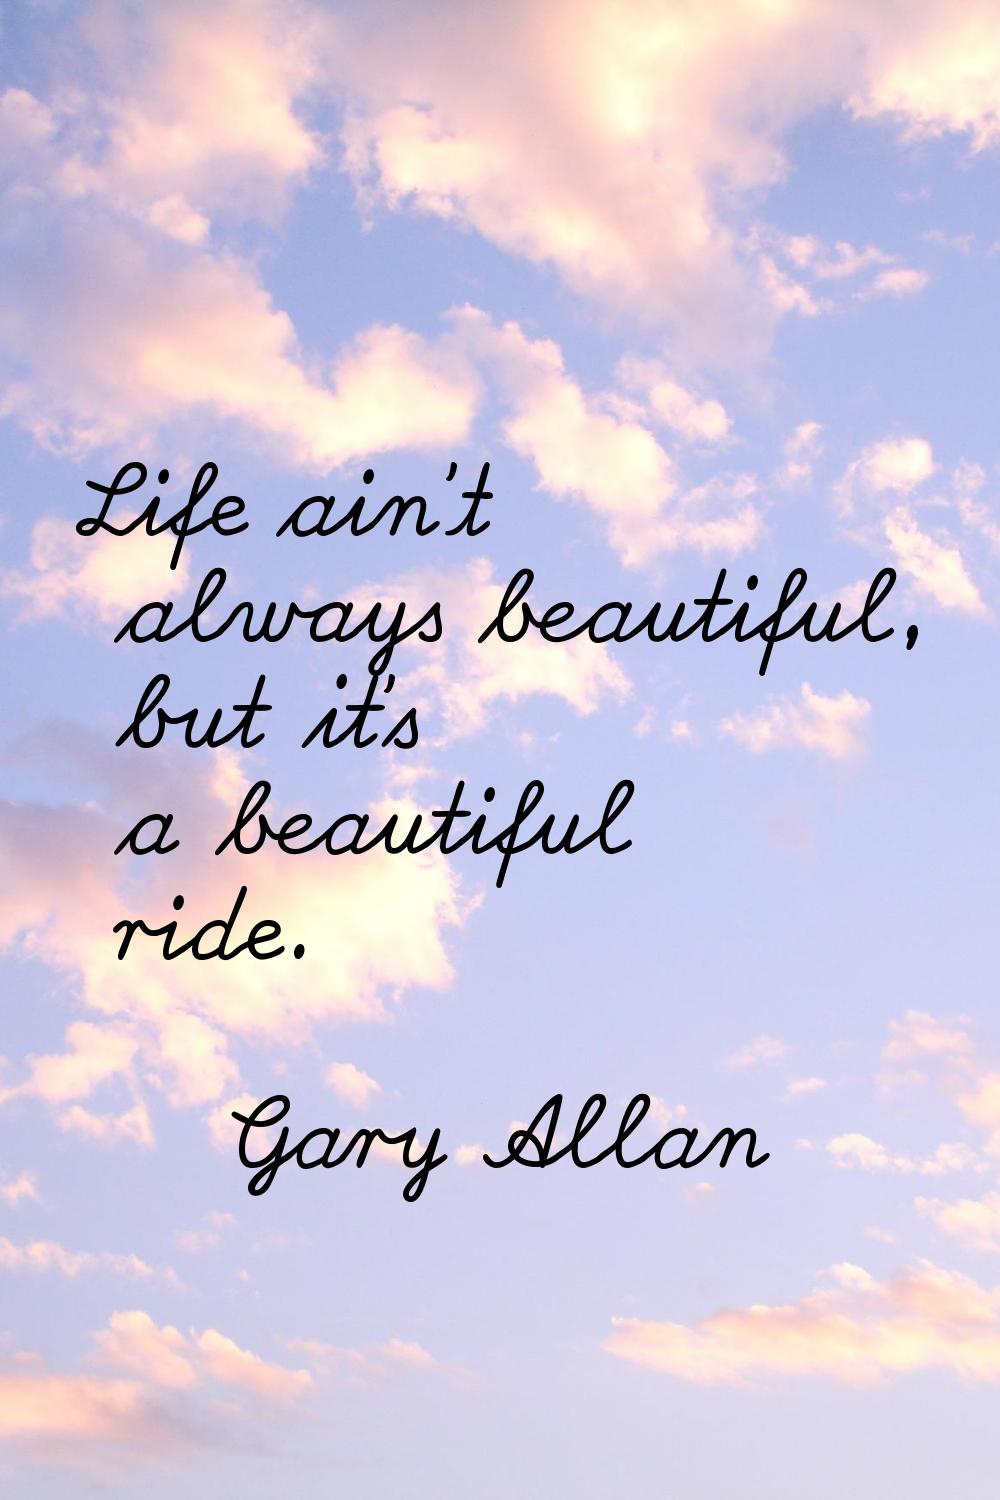 Life ain't always beautiful, but it's a beautiful ride.